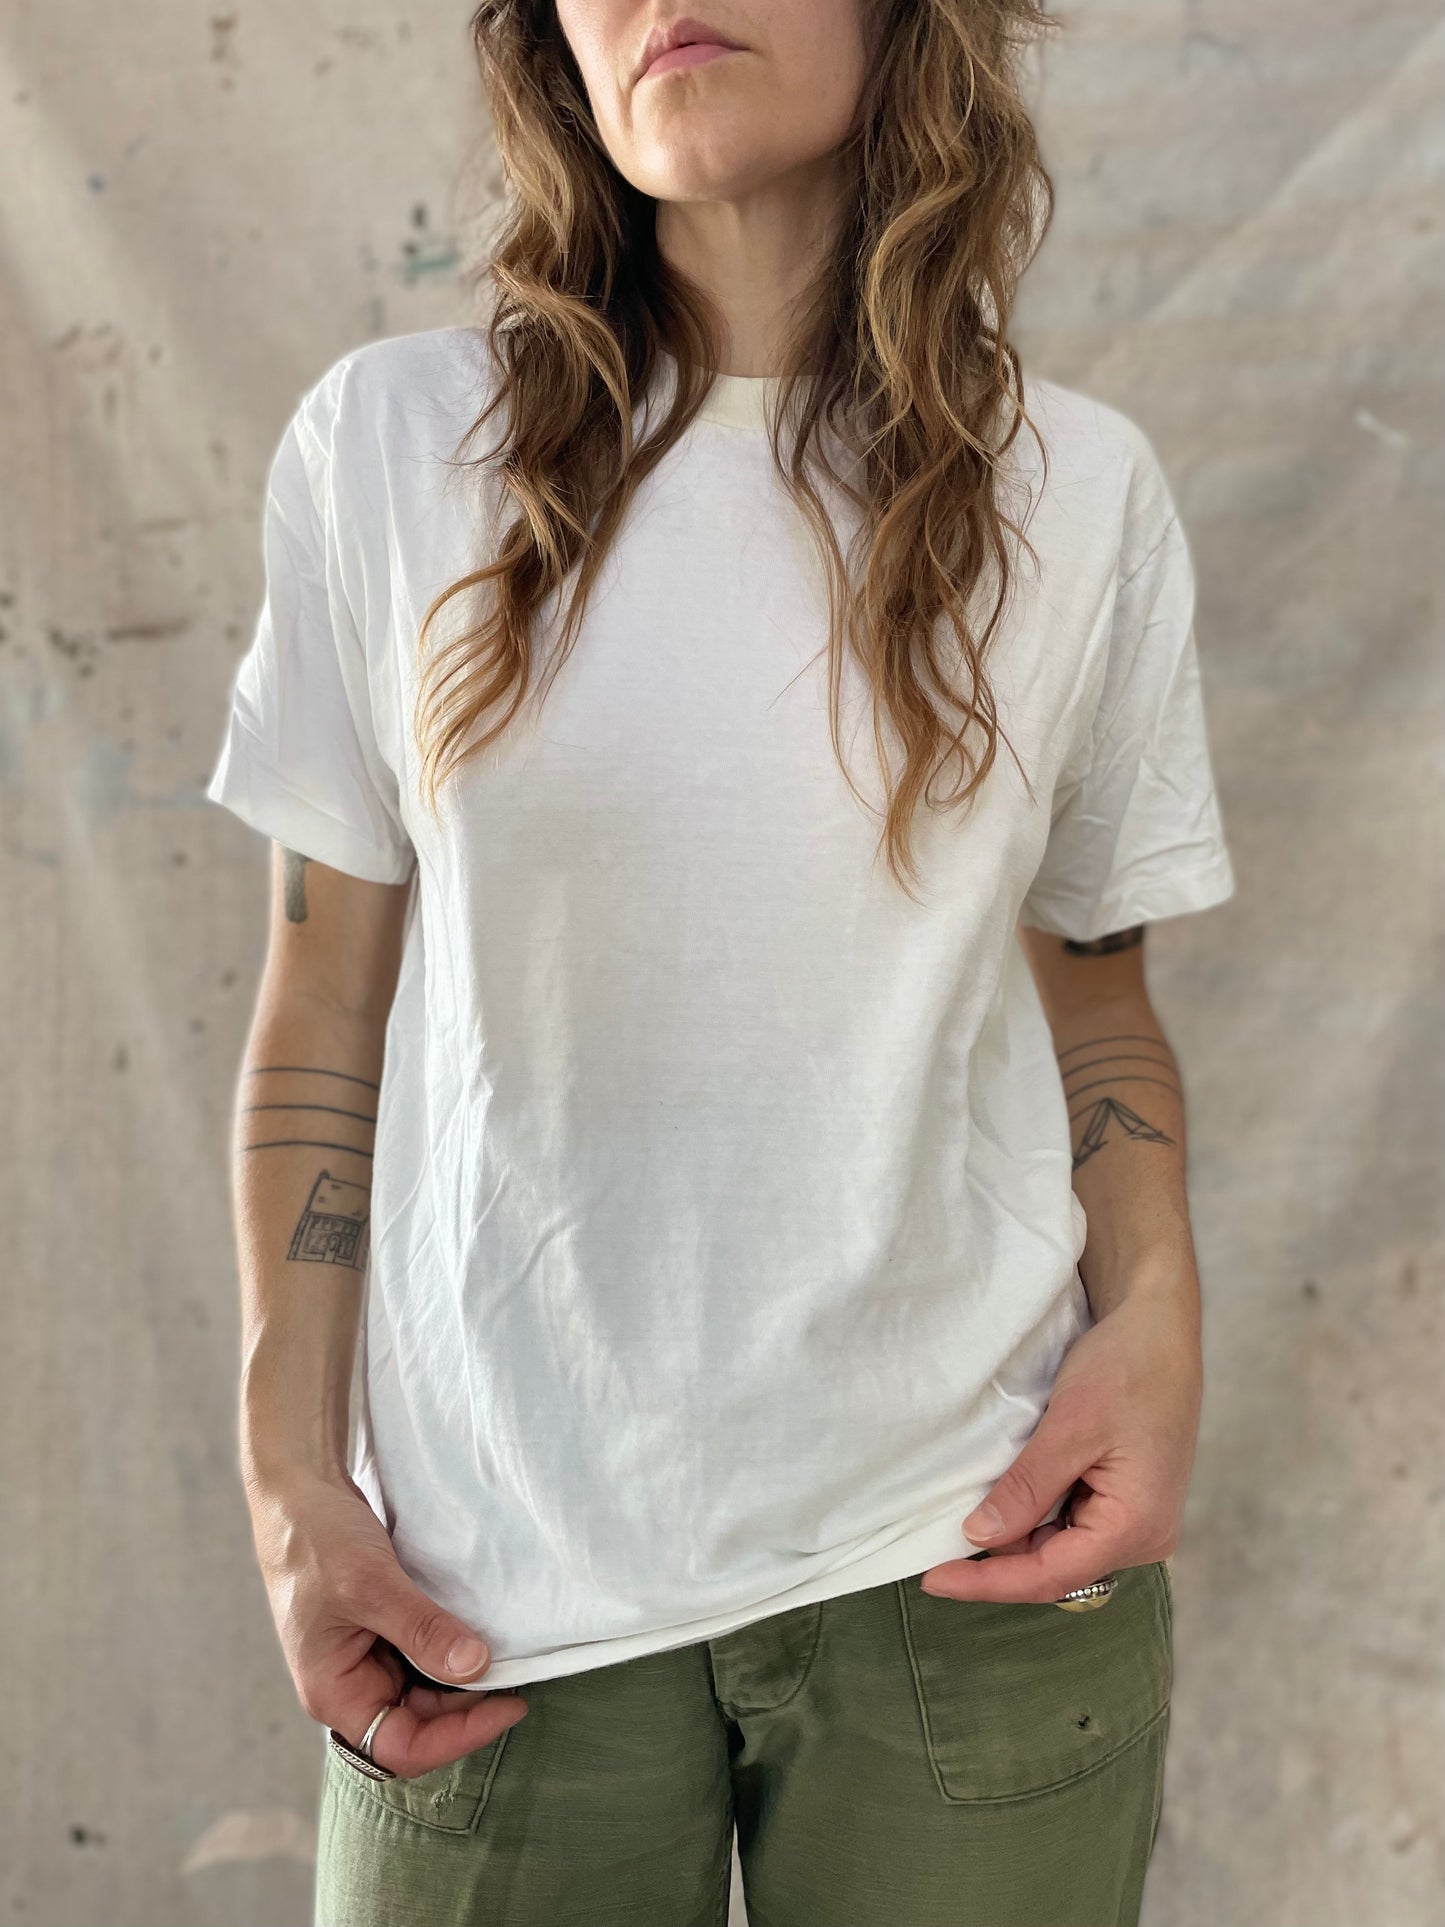 80s JCPenney Blank White Tee